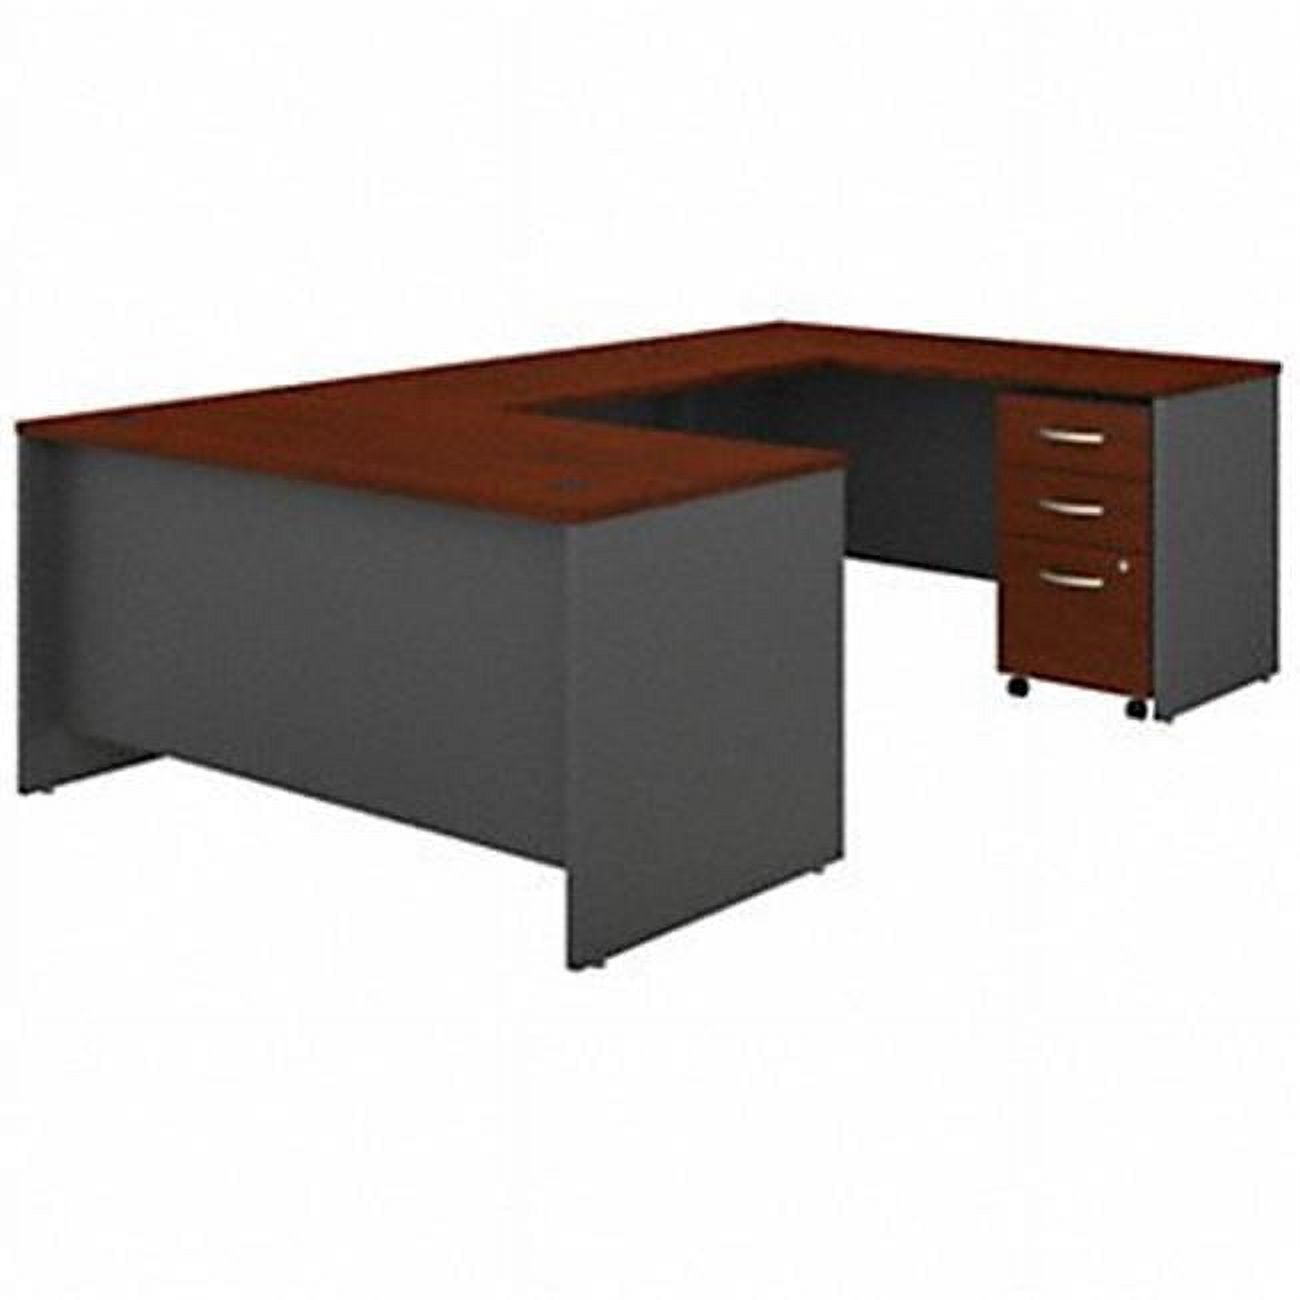 Series C 60W U Shaped Desk with Drawers in Hansen Cherry - Engineered Wood - image 1 of 10